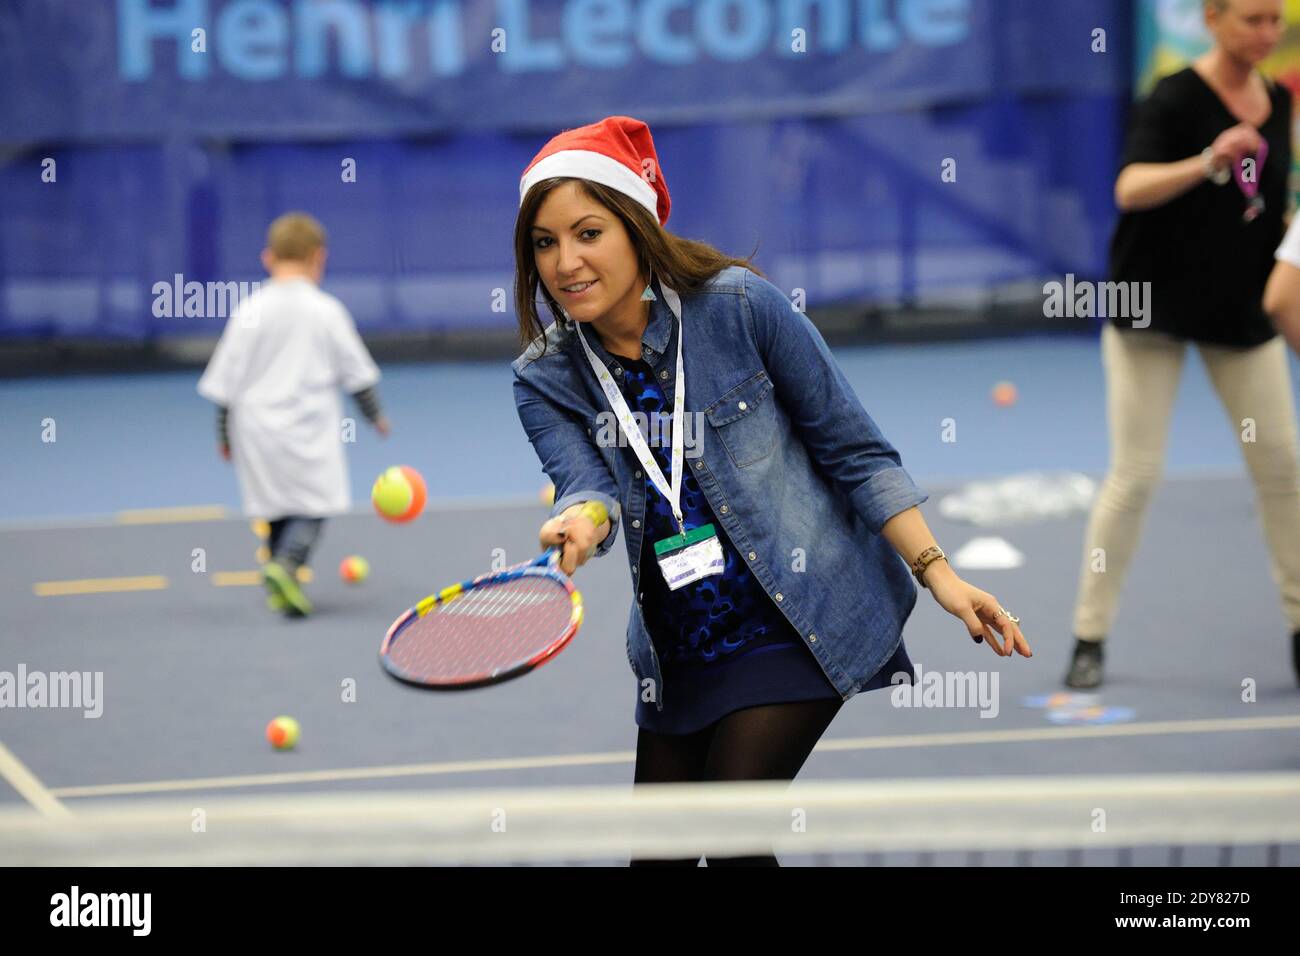 Leslie Benaroch attending Sourire Gagnant event by Enfant Star and Match  association at Levallois Sporting Tennis Club near Paris, France on  December 18, 2014. Photo by Alban Wyters/ABACAPRESS.COM Stock Photo - Alamy